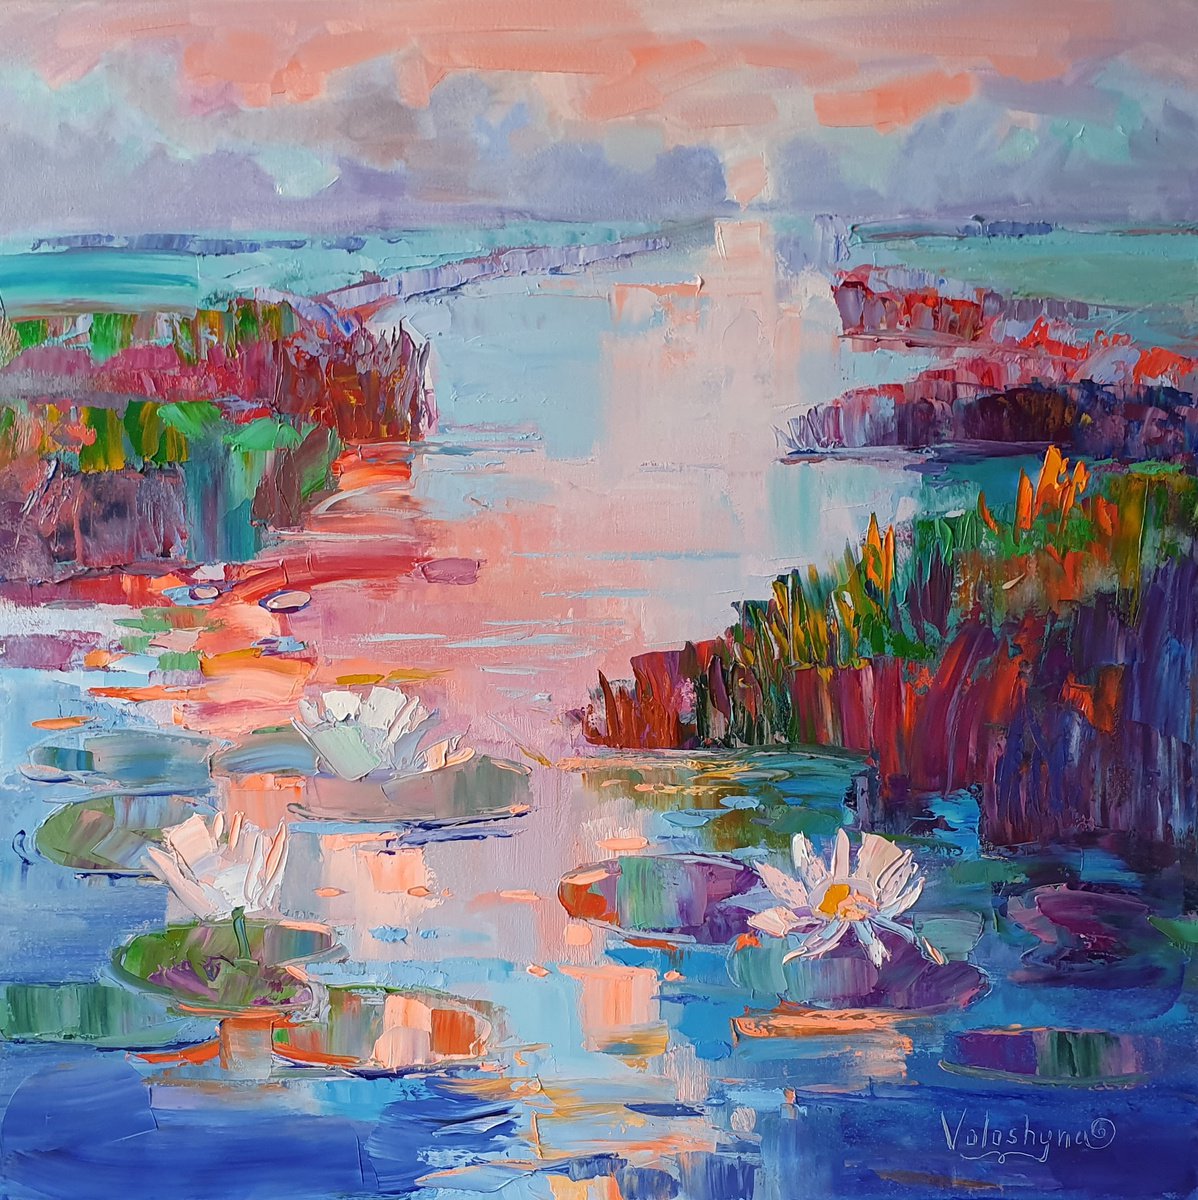 Lilies on the pond by Mary Voloshyna